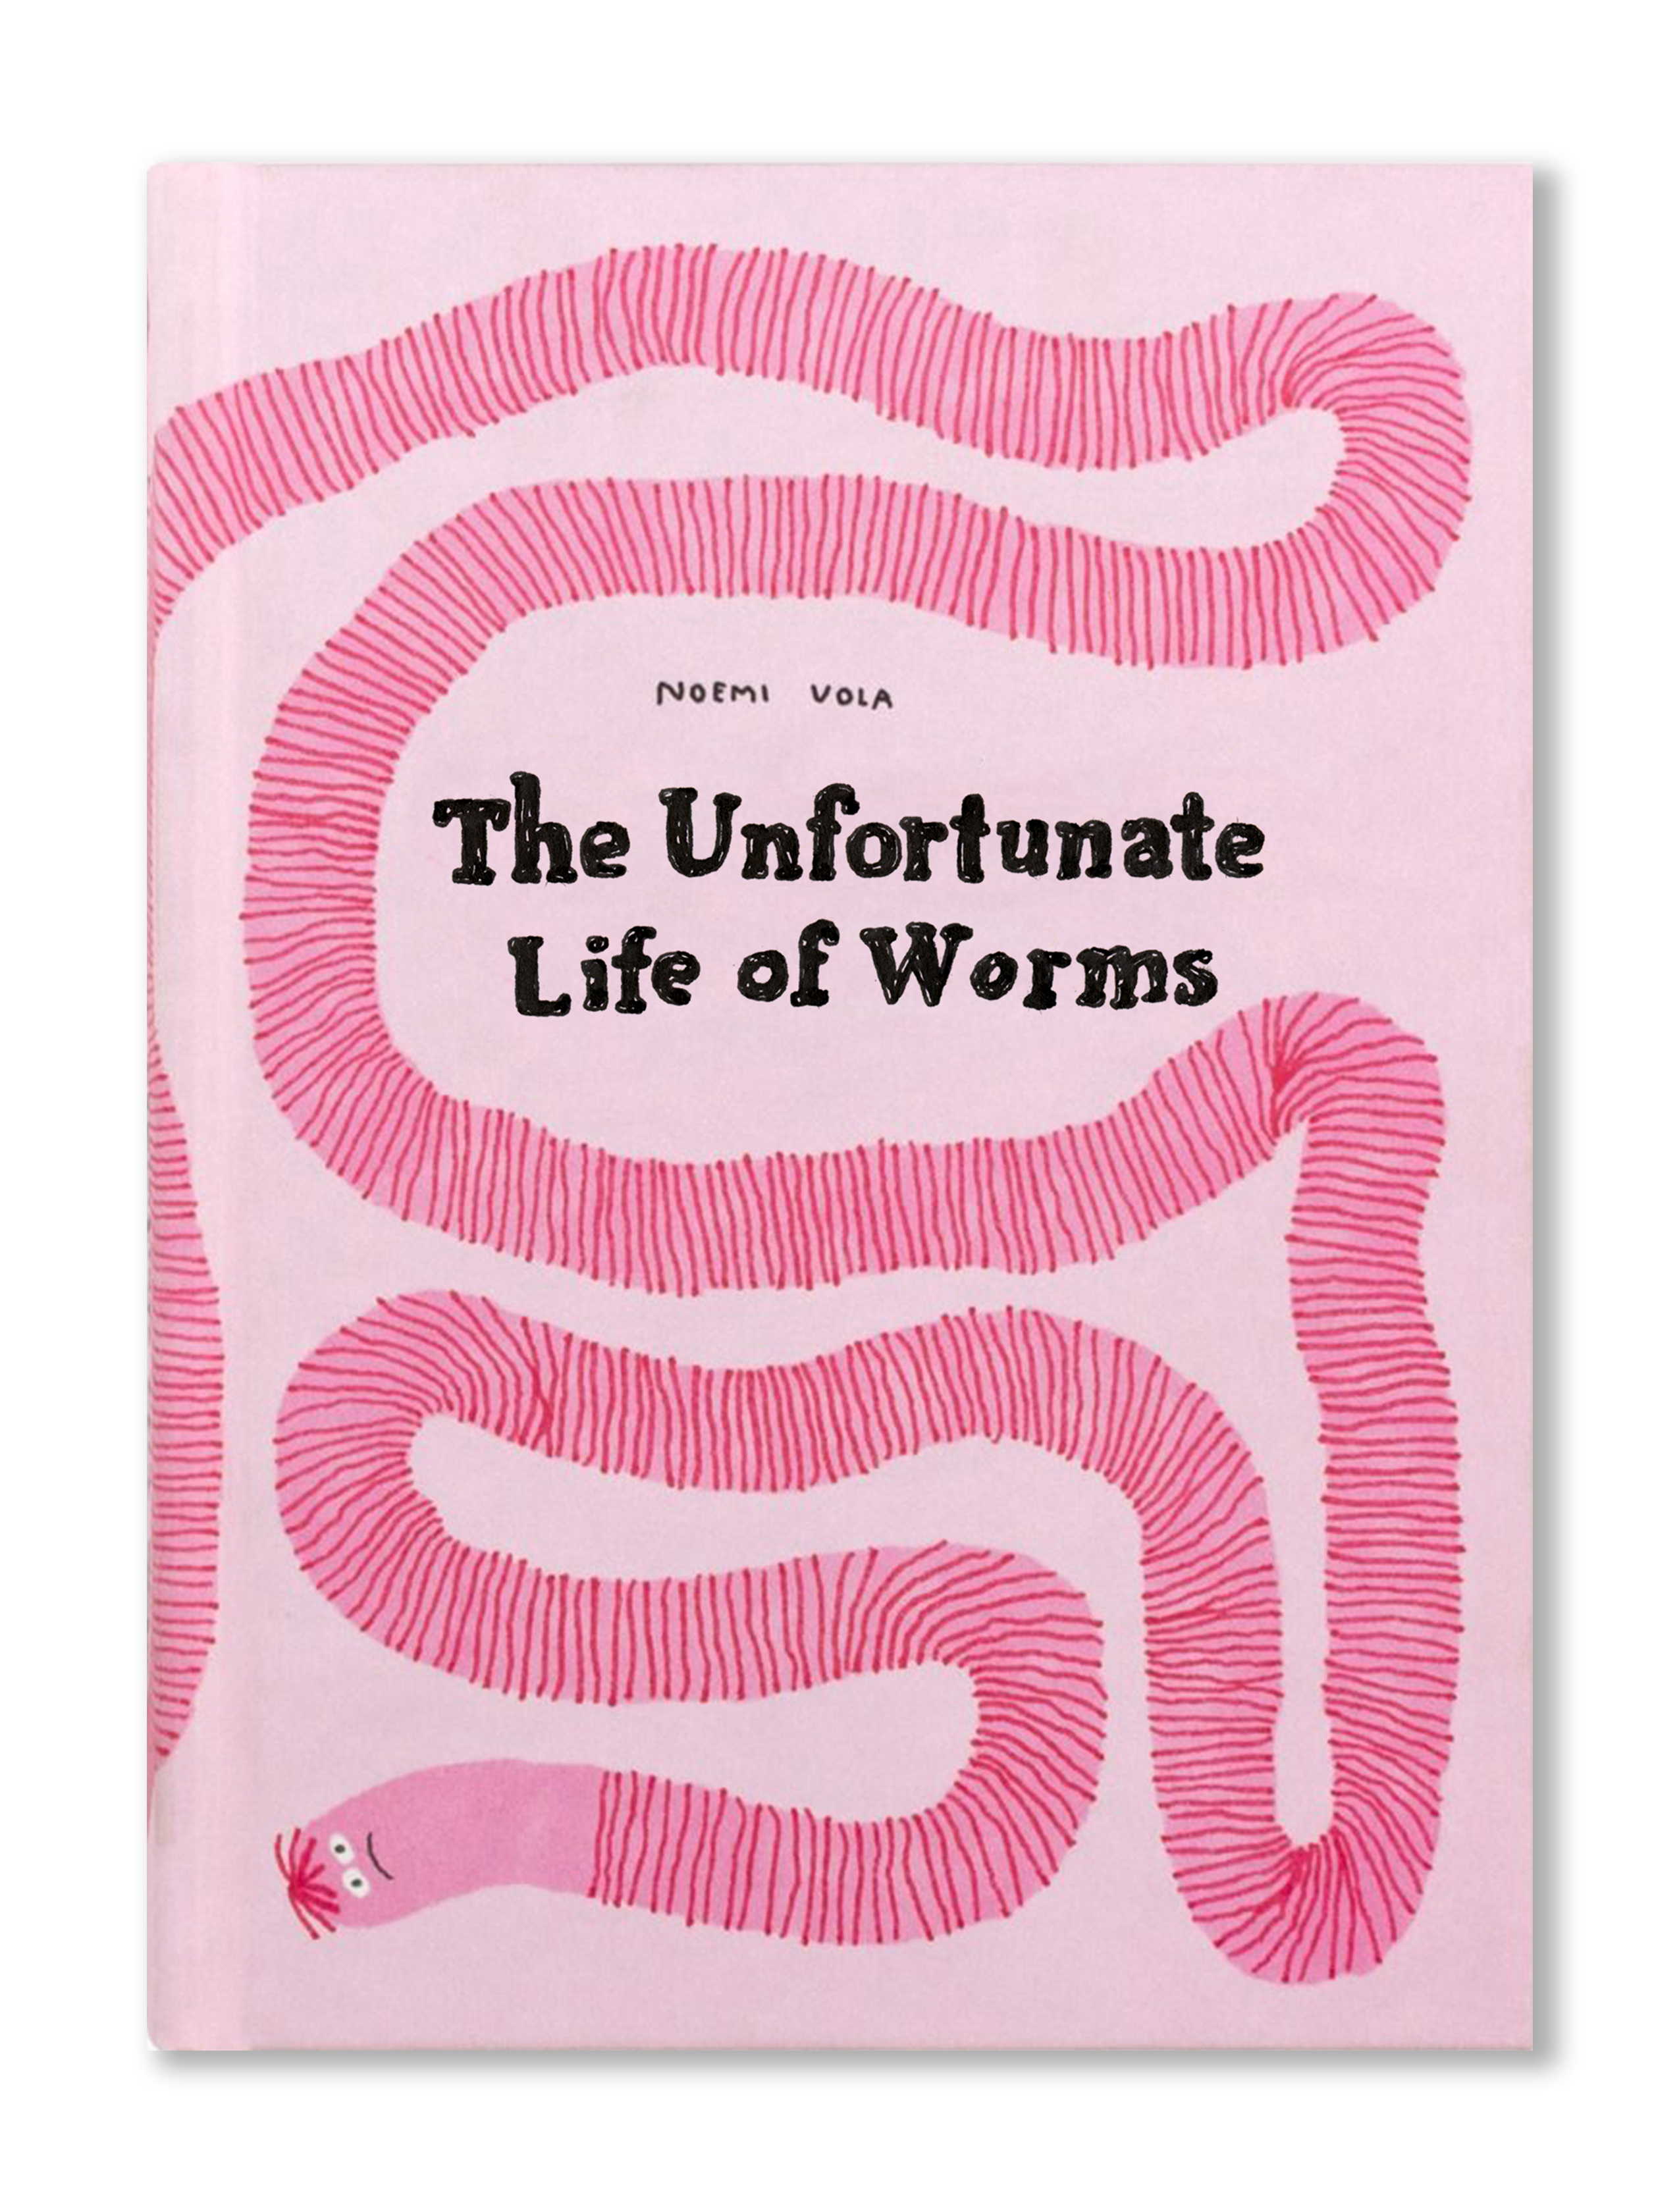 The Unfortunate Life of Worms